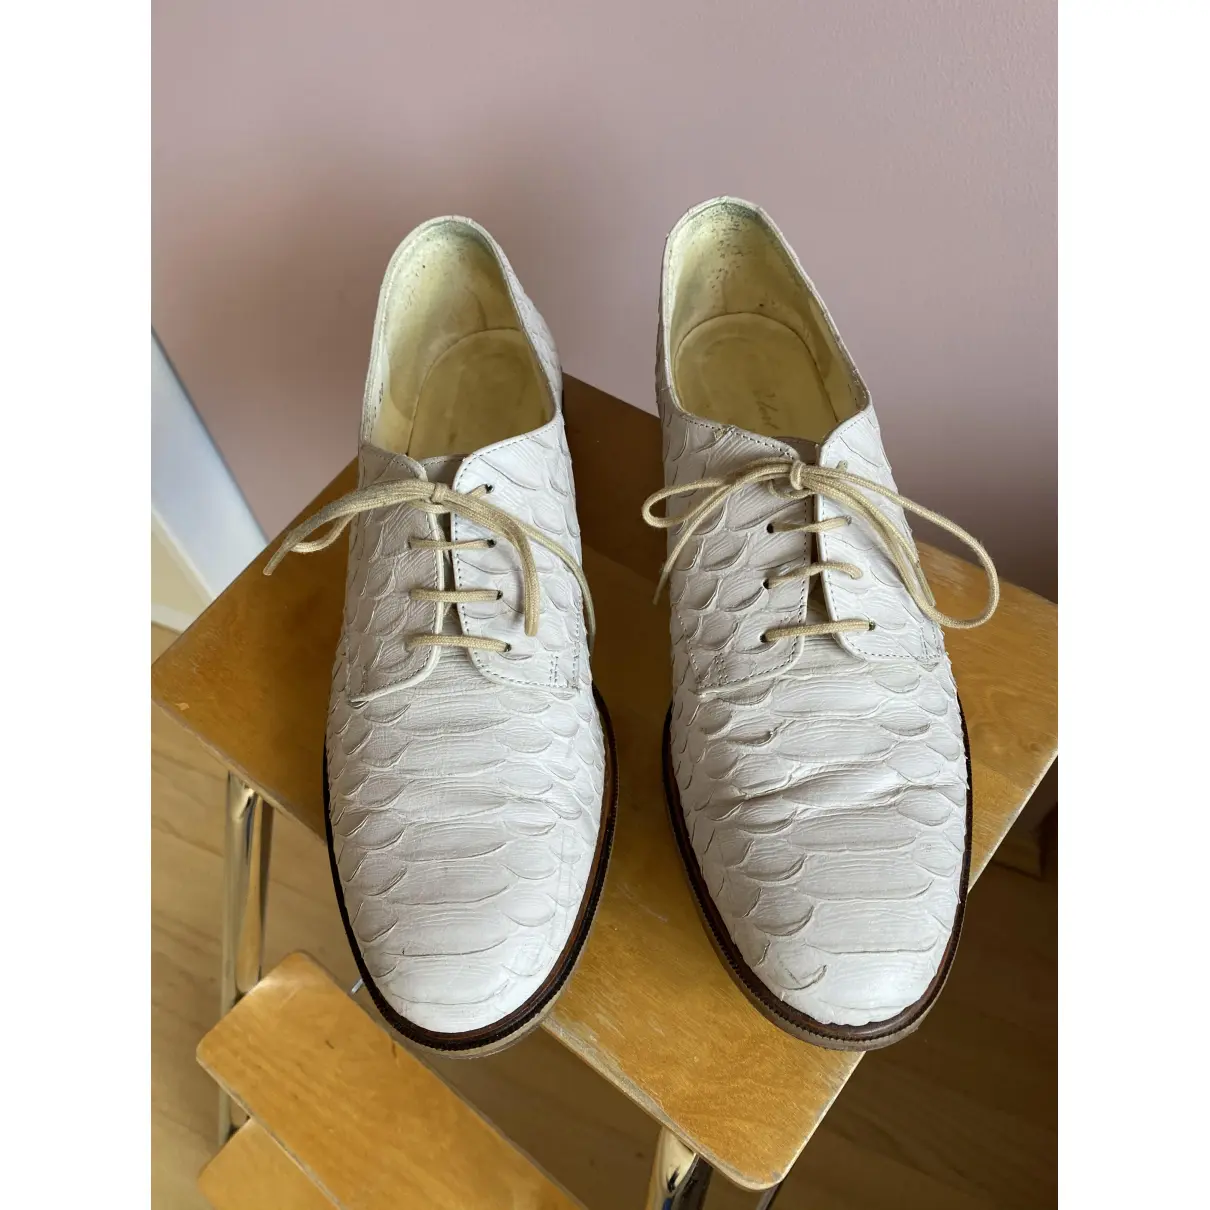 Buy Robert Clergerie Leather lace ups online